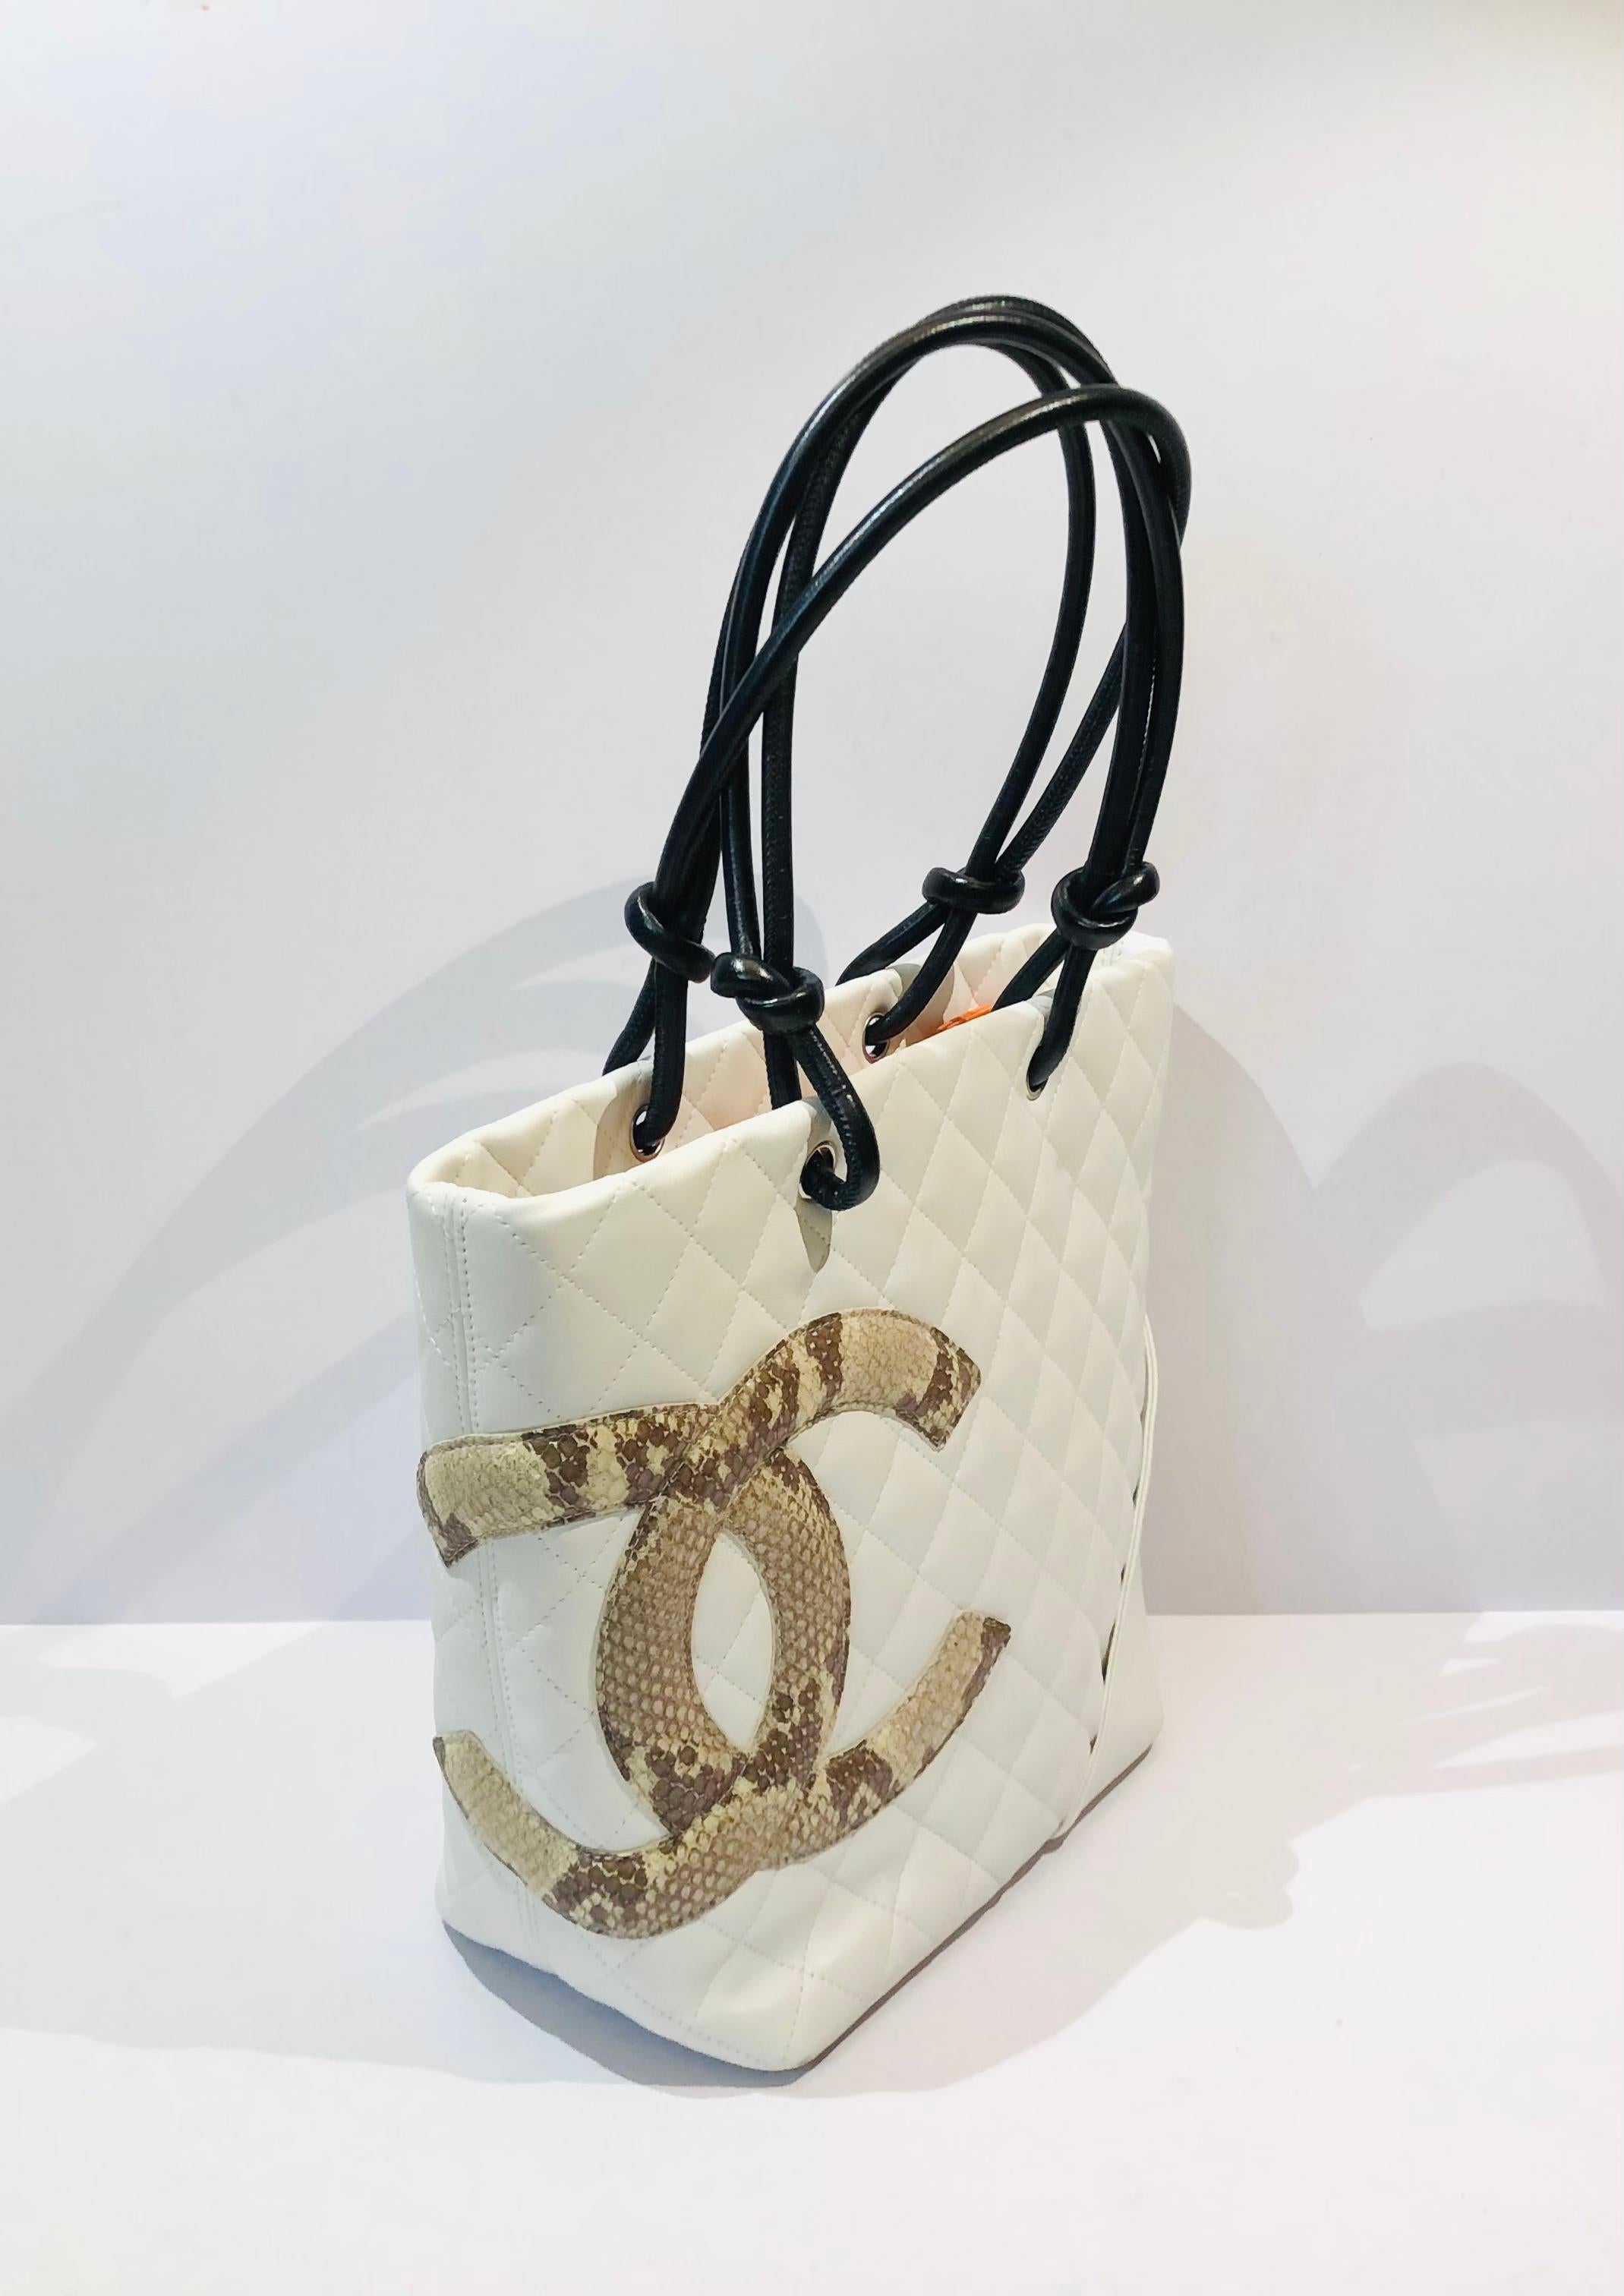 
- Chanel white lambskin quilted tote bag with embossed snakeskin “CC” logo.

- Orange “CC” satin lining with zip closure. 

- Exterior slip pocket. 

- Two interior zip pockets 

- Length: 20cm.
- Height: 24cm.
- Width: 11cm. 
- Handle Drop: 21cm. 